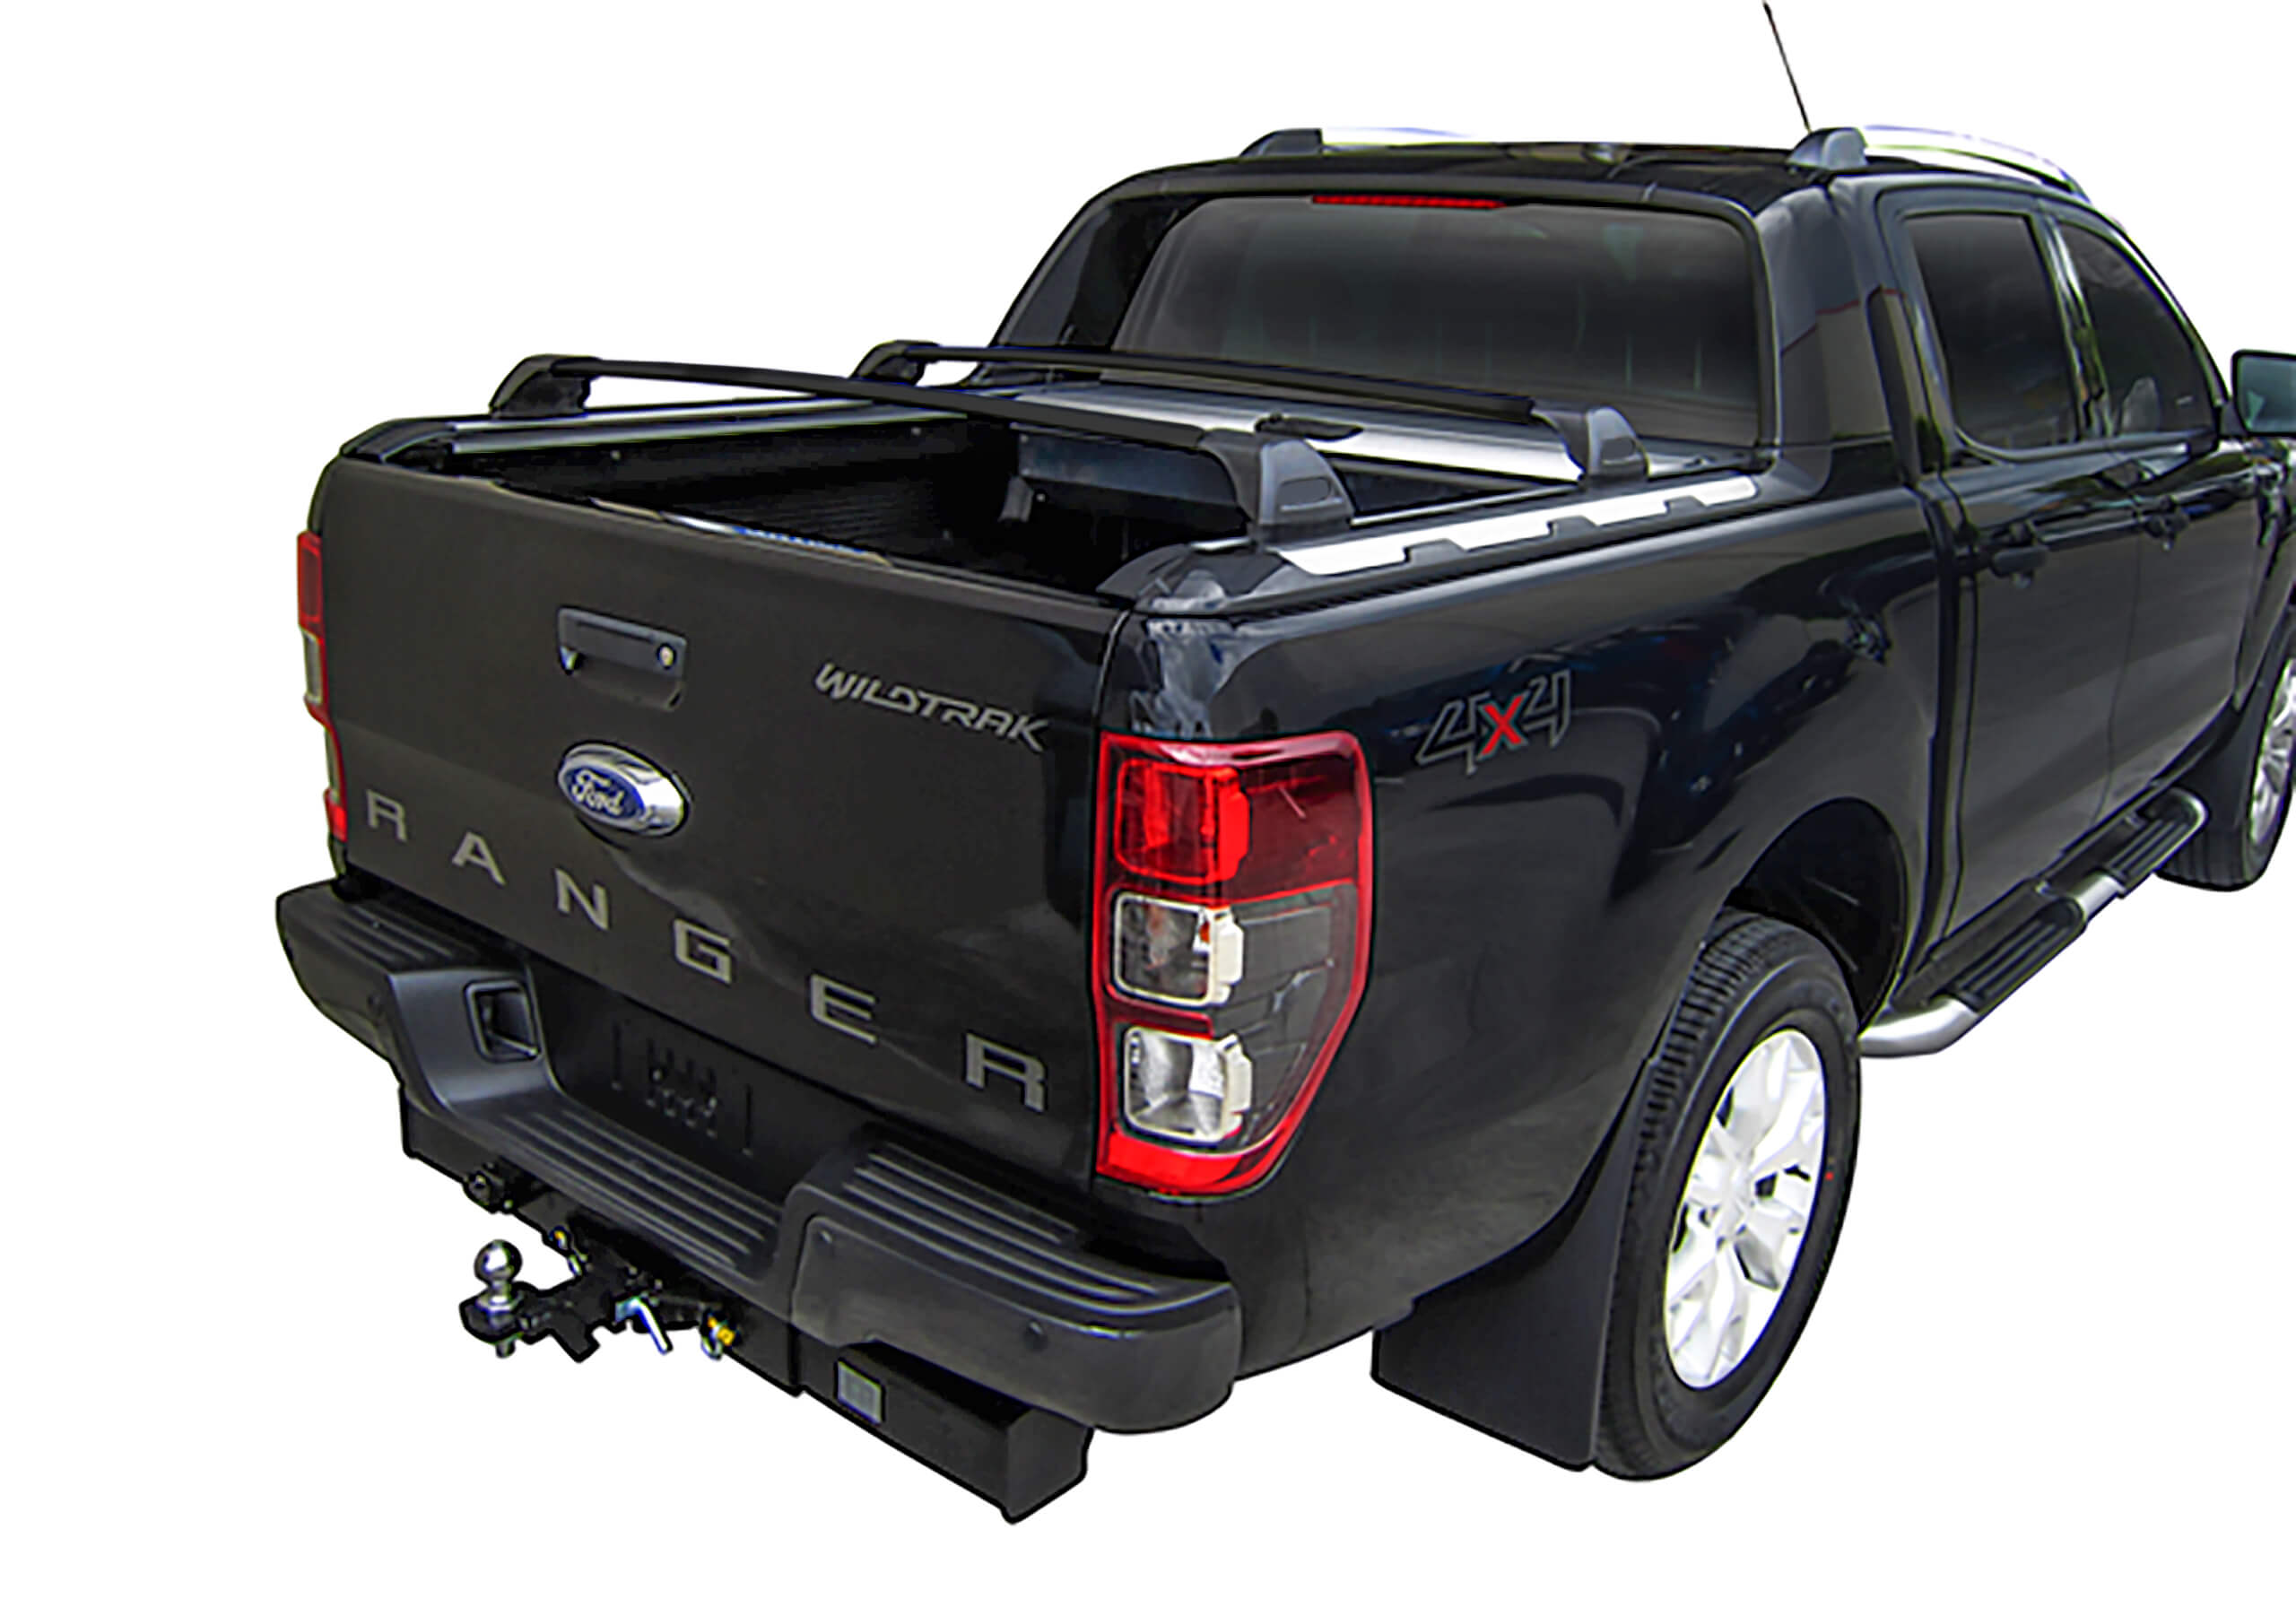 Ford Ranger double cab (2016 onwards):Yakima roof bars package - S11 black bars with K450 kit